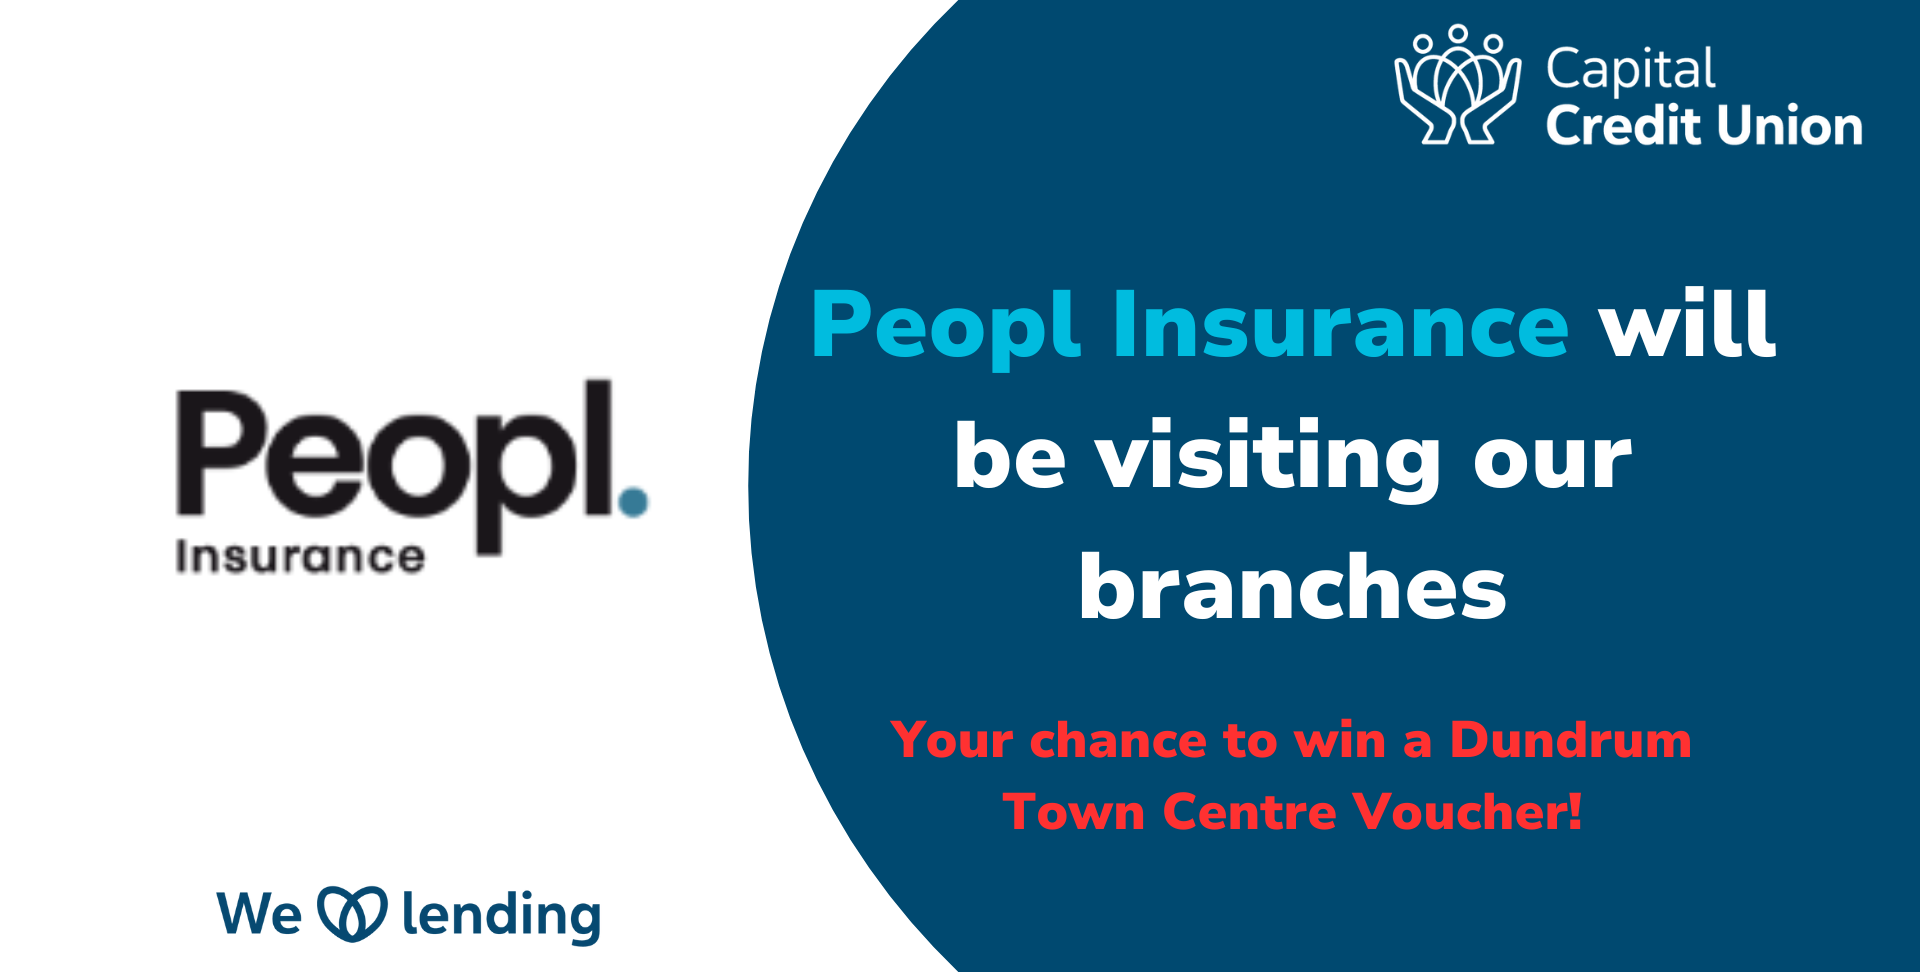 Peopl Insurance Branch Visits and Giveaways